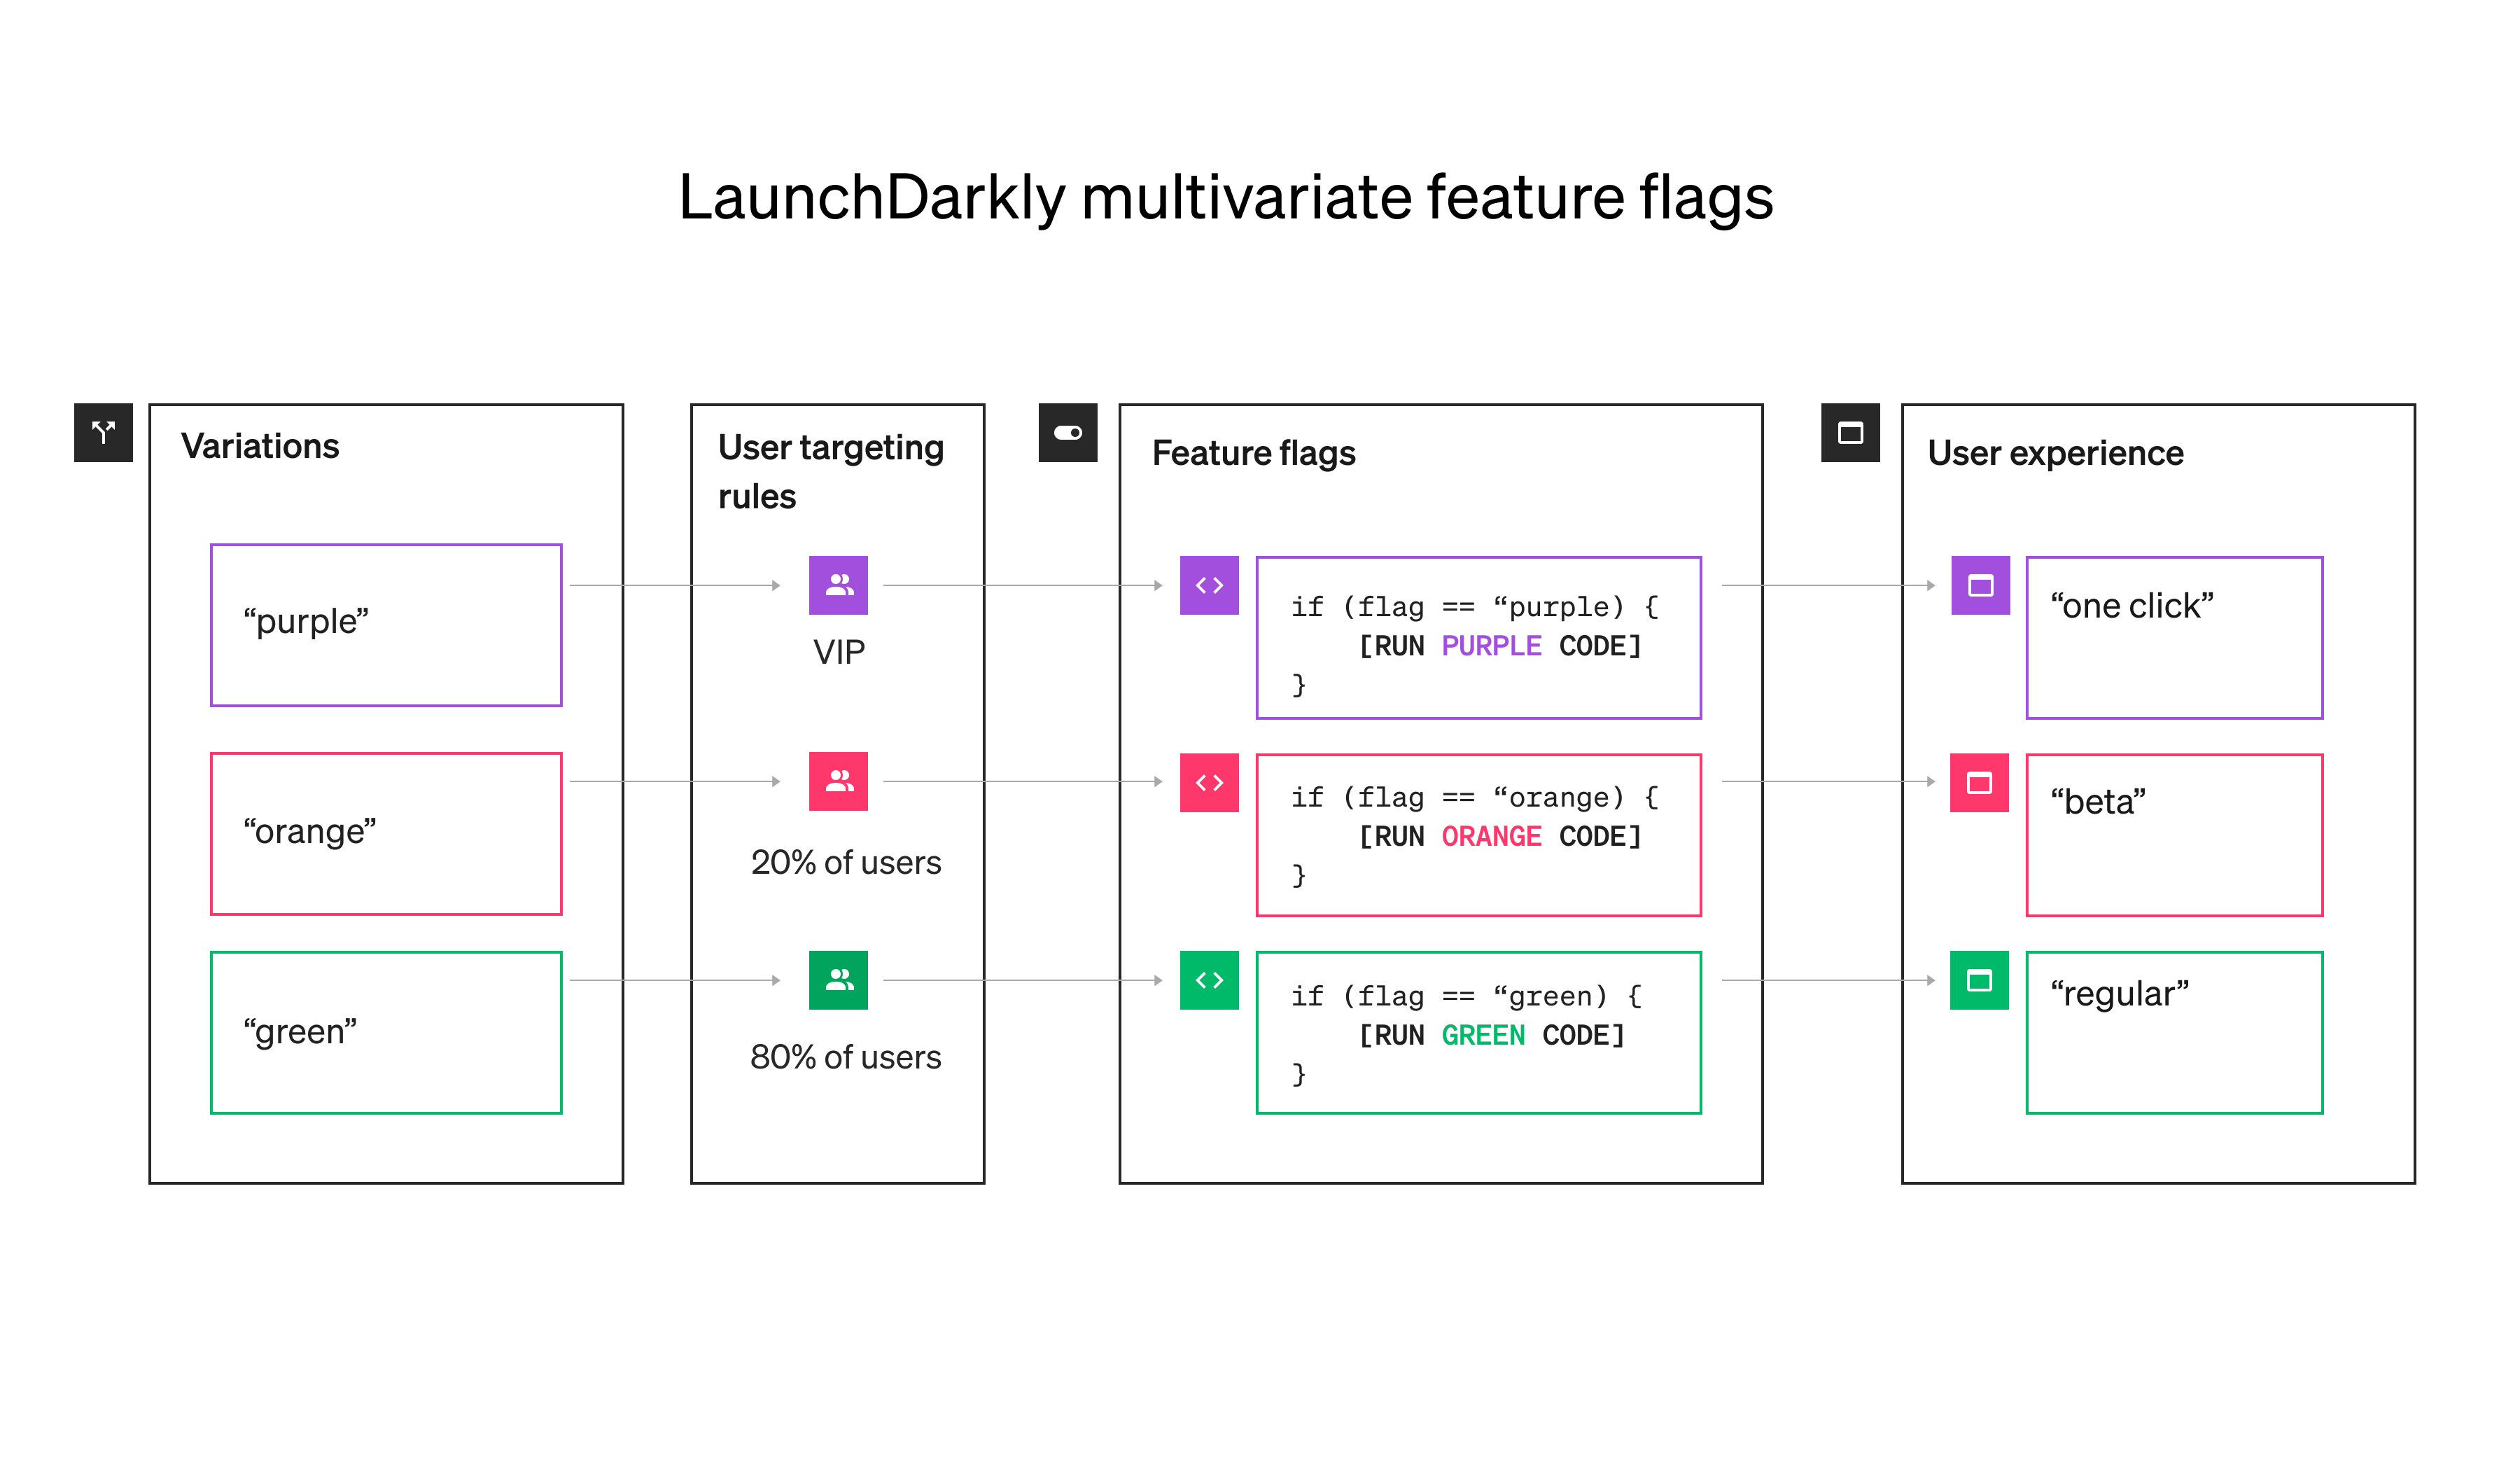 LaunchDarkly Multivariate feature flags infographic